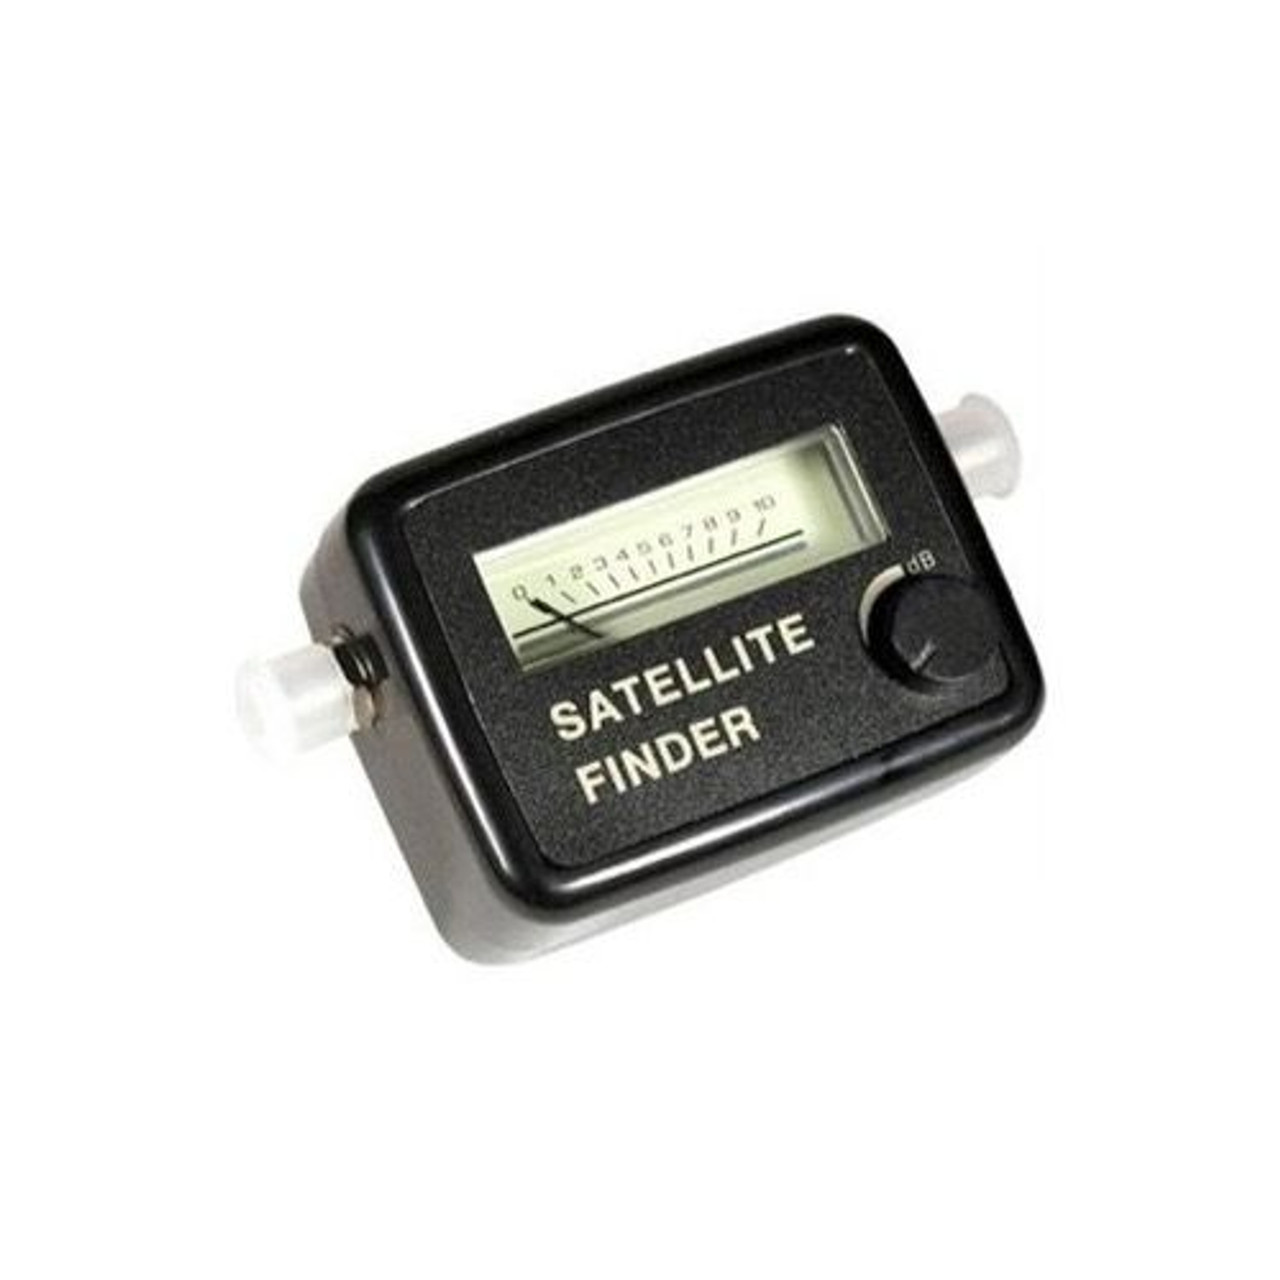 Steren 200-992 Satellite Finder with Analog Meter SF-95 Pocket Adjustable Strength Frequency Level Signal Meter 950-2250 MHz Squawker Dish TV Antenna Signal Locator Tester, DIRECTV / Dish Network, Part # 200992